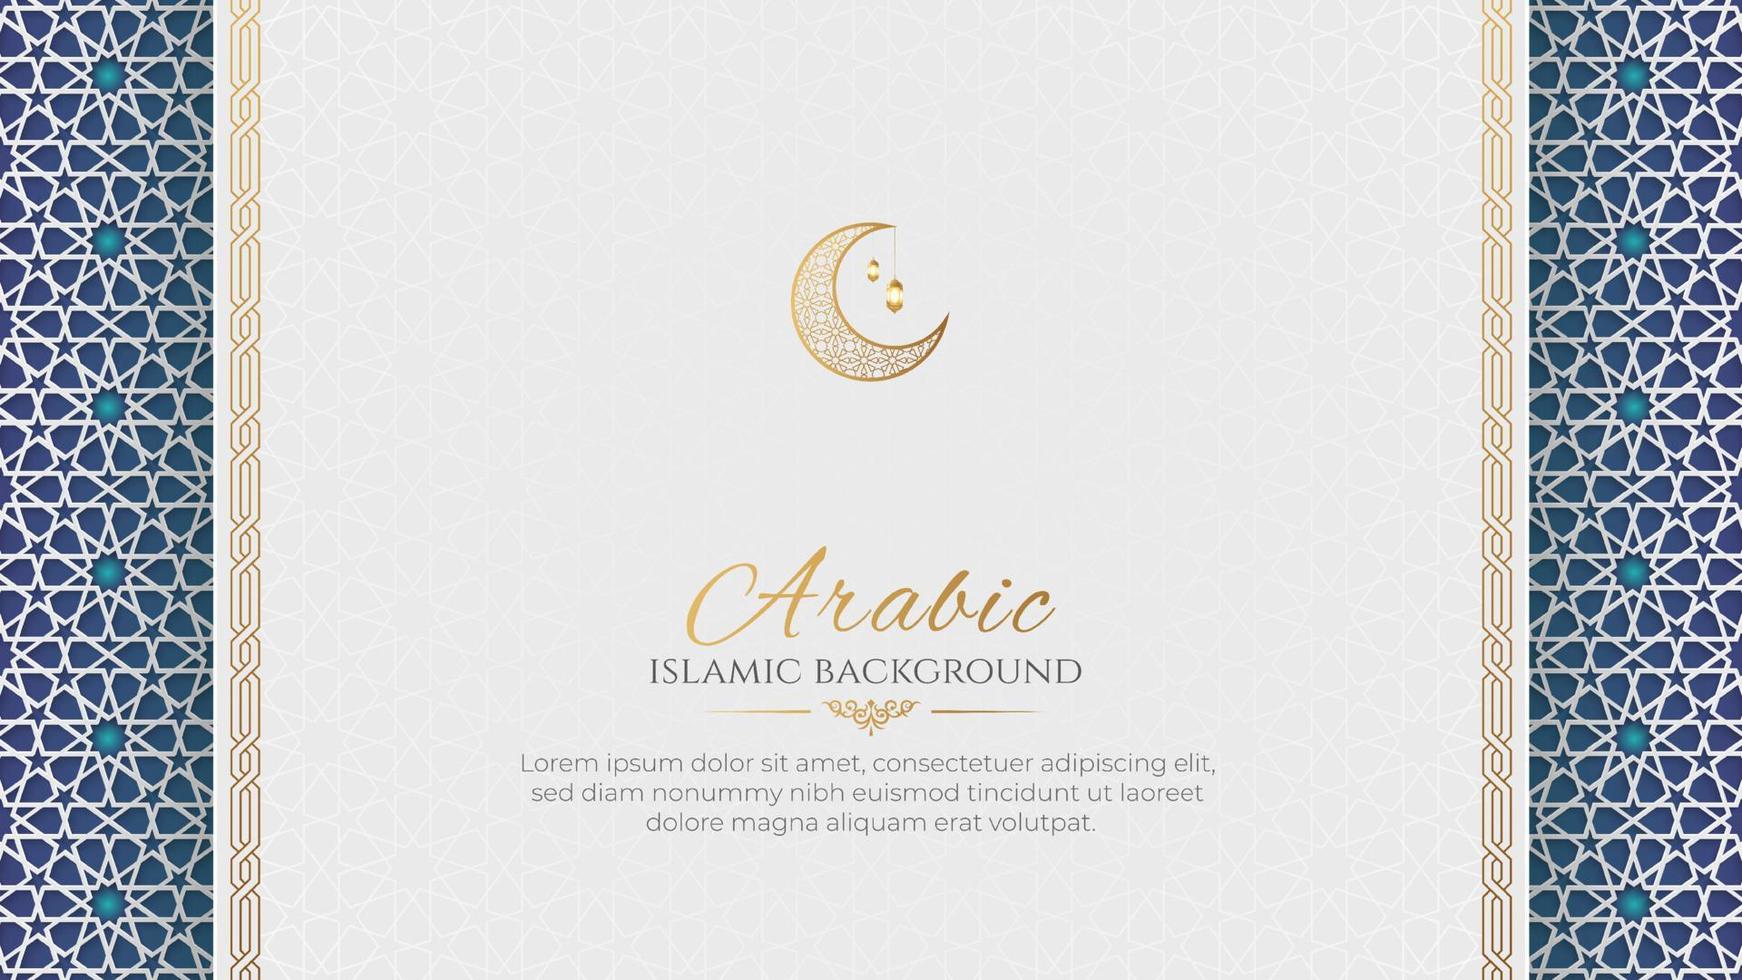 Arabic Islamic White and Golden Luxury Colorful Page Style Background with Arabic Pattern and Decorative Ornament Border Frame vector